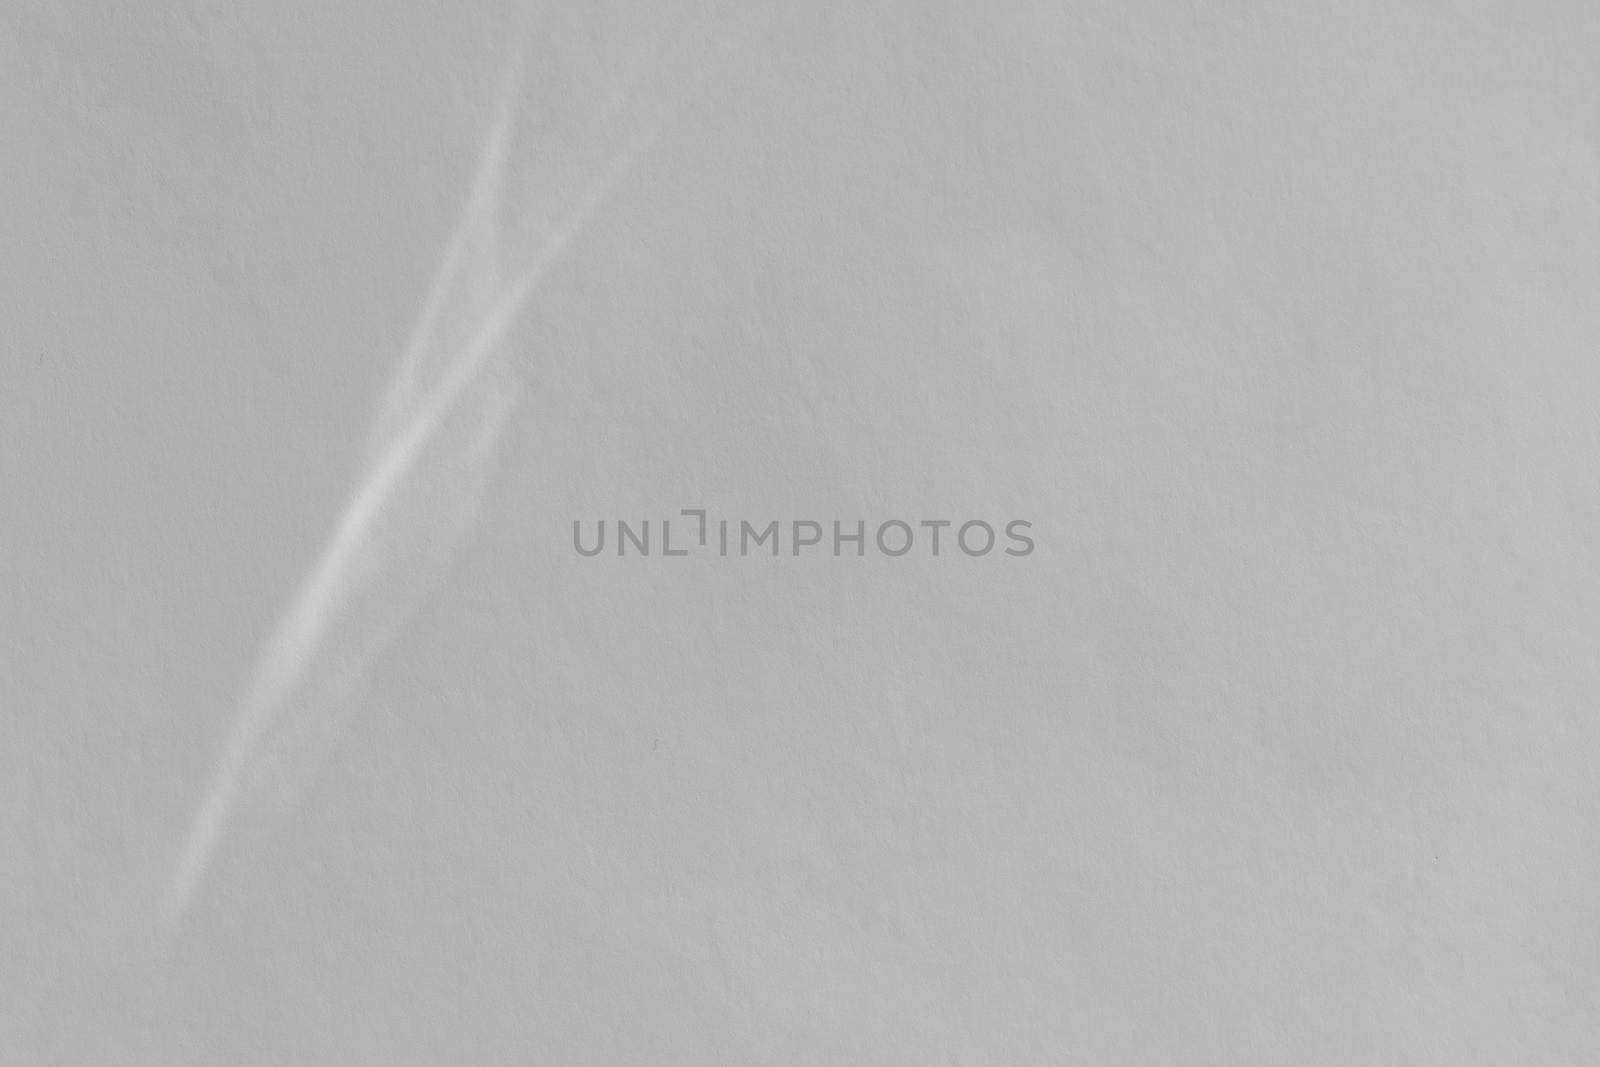 Caustic effect light refraction on white wall overlay photo mockup, blurred sun rays refracting through glass prism with shadow. Abstract natural light refraction silhouette on water surface by photolime